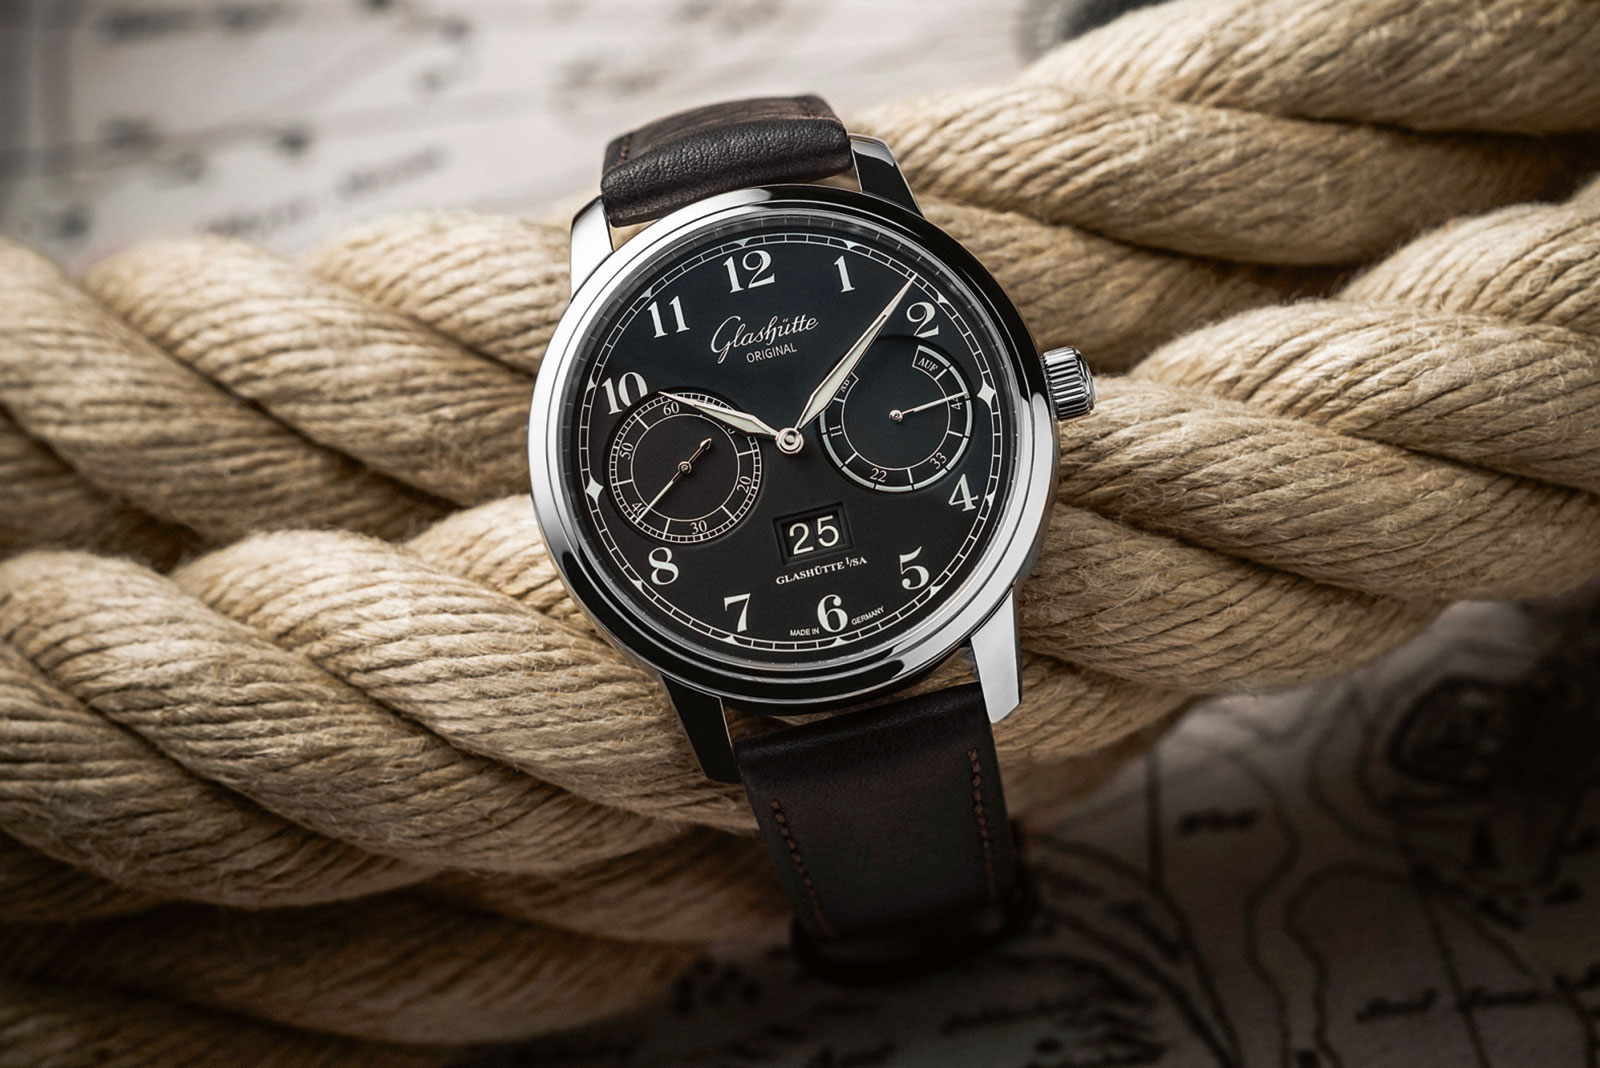 Wristreview's Top 5 Watches From Glashütte Original